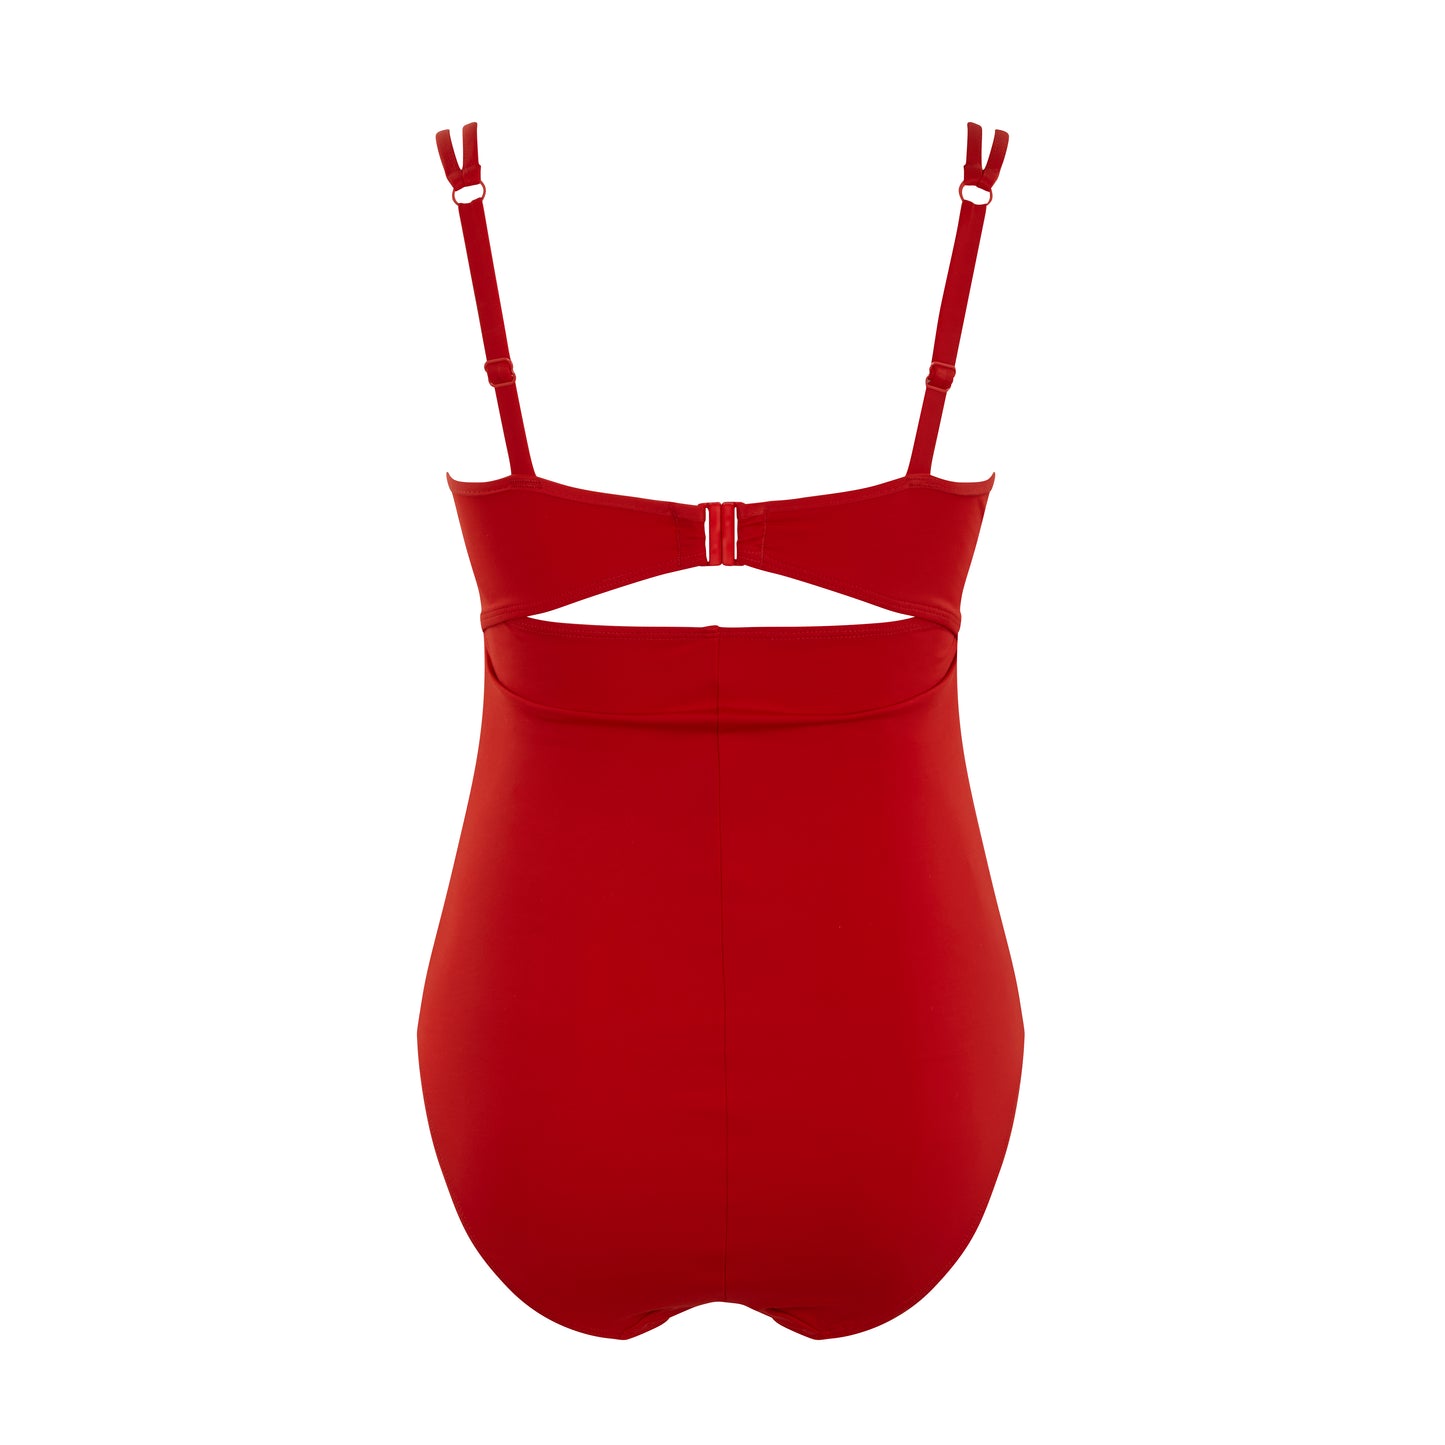 Panache Anya Riva One piece Swimsuit - up to a K cup!